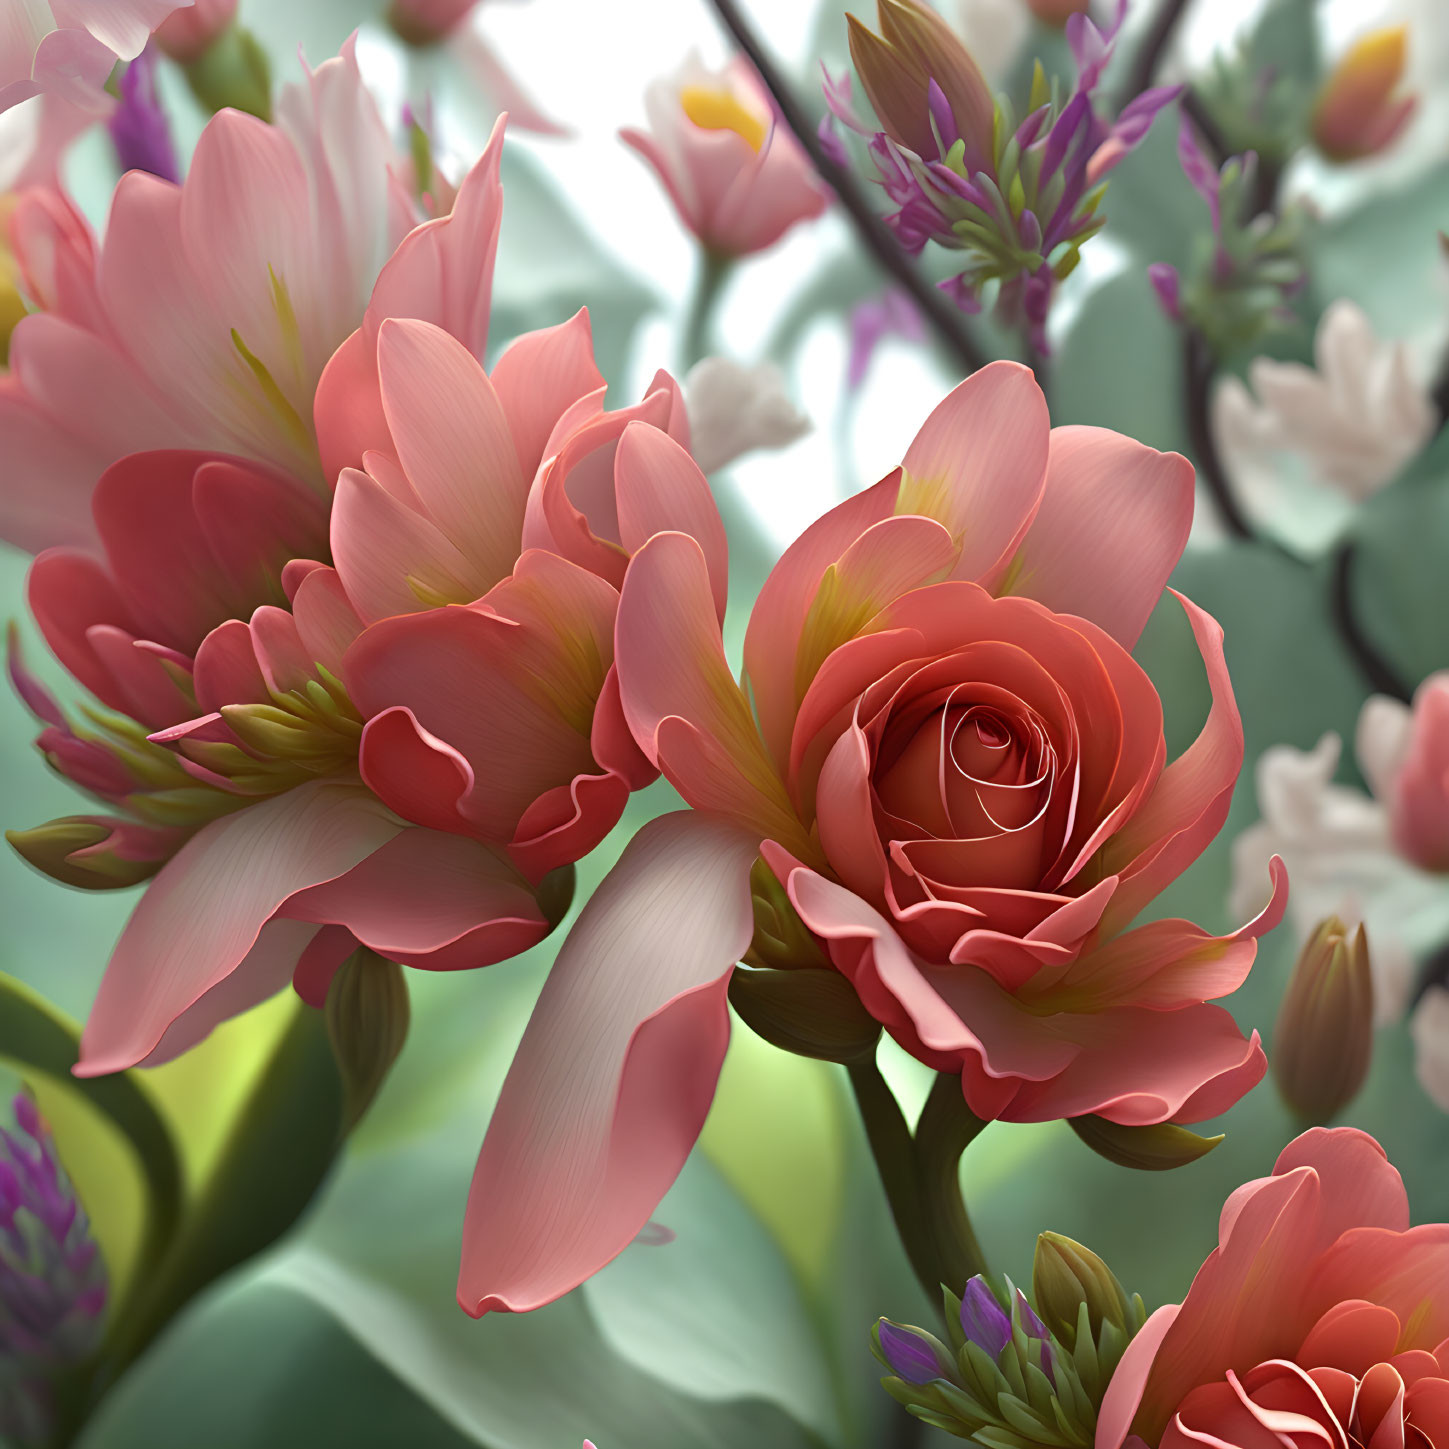 Colorful digital illustration of blooming flowers with prominent pink and red rose and surrounding buds